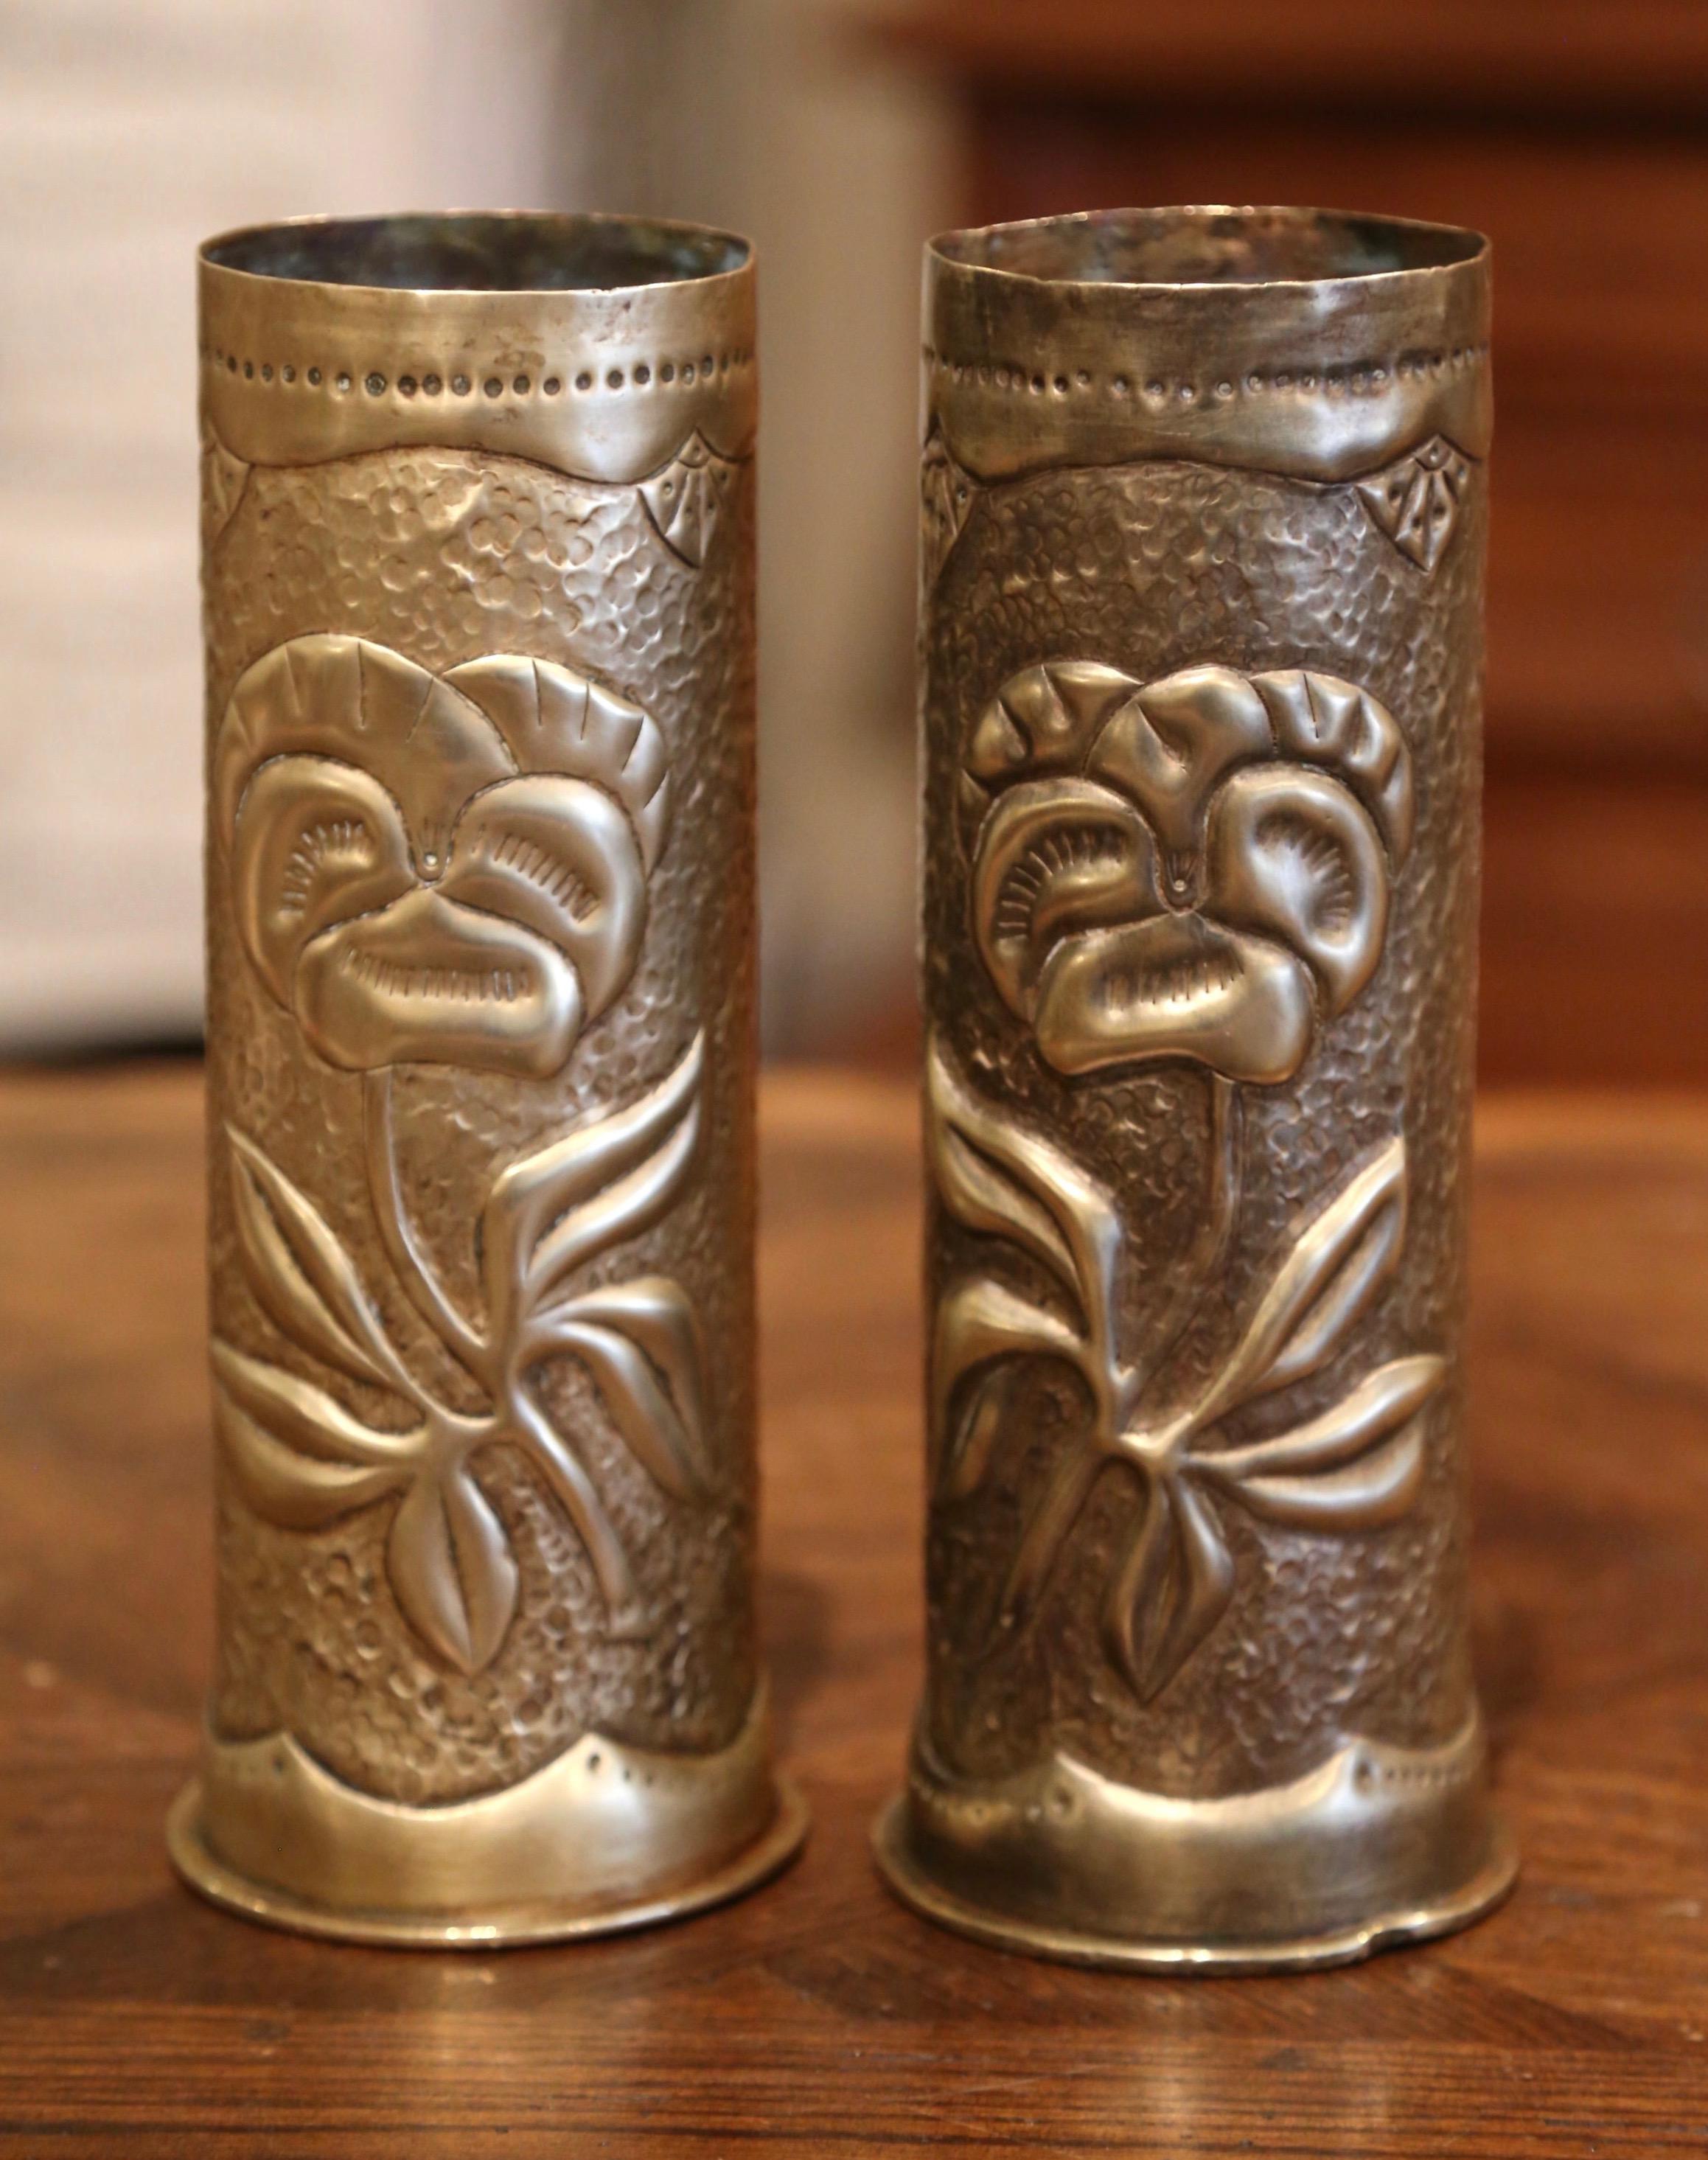 Decorate a man's office or a study display shelf with this pair of antique trench art shell vases. Made of brass and dated 1917 on the bottom, the artillery shell casing vases feature repousse floral and leaf decor. Both WWI historical memorabilia